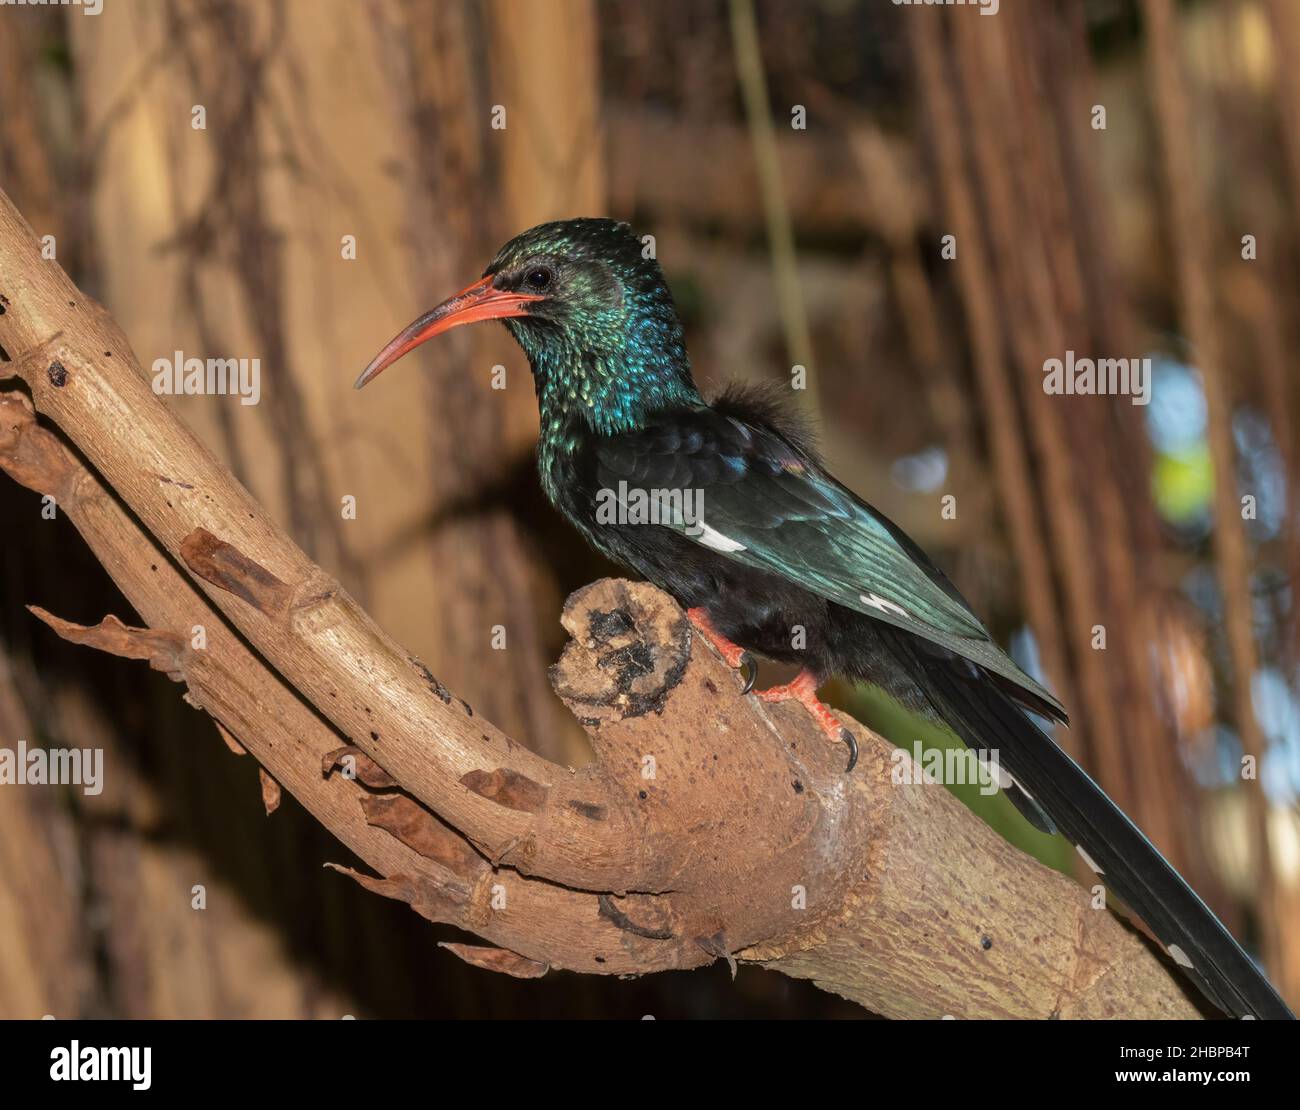 Green wood hoopoe perched on a tree branch Stock Photo